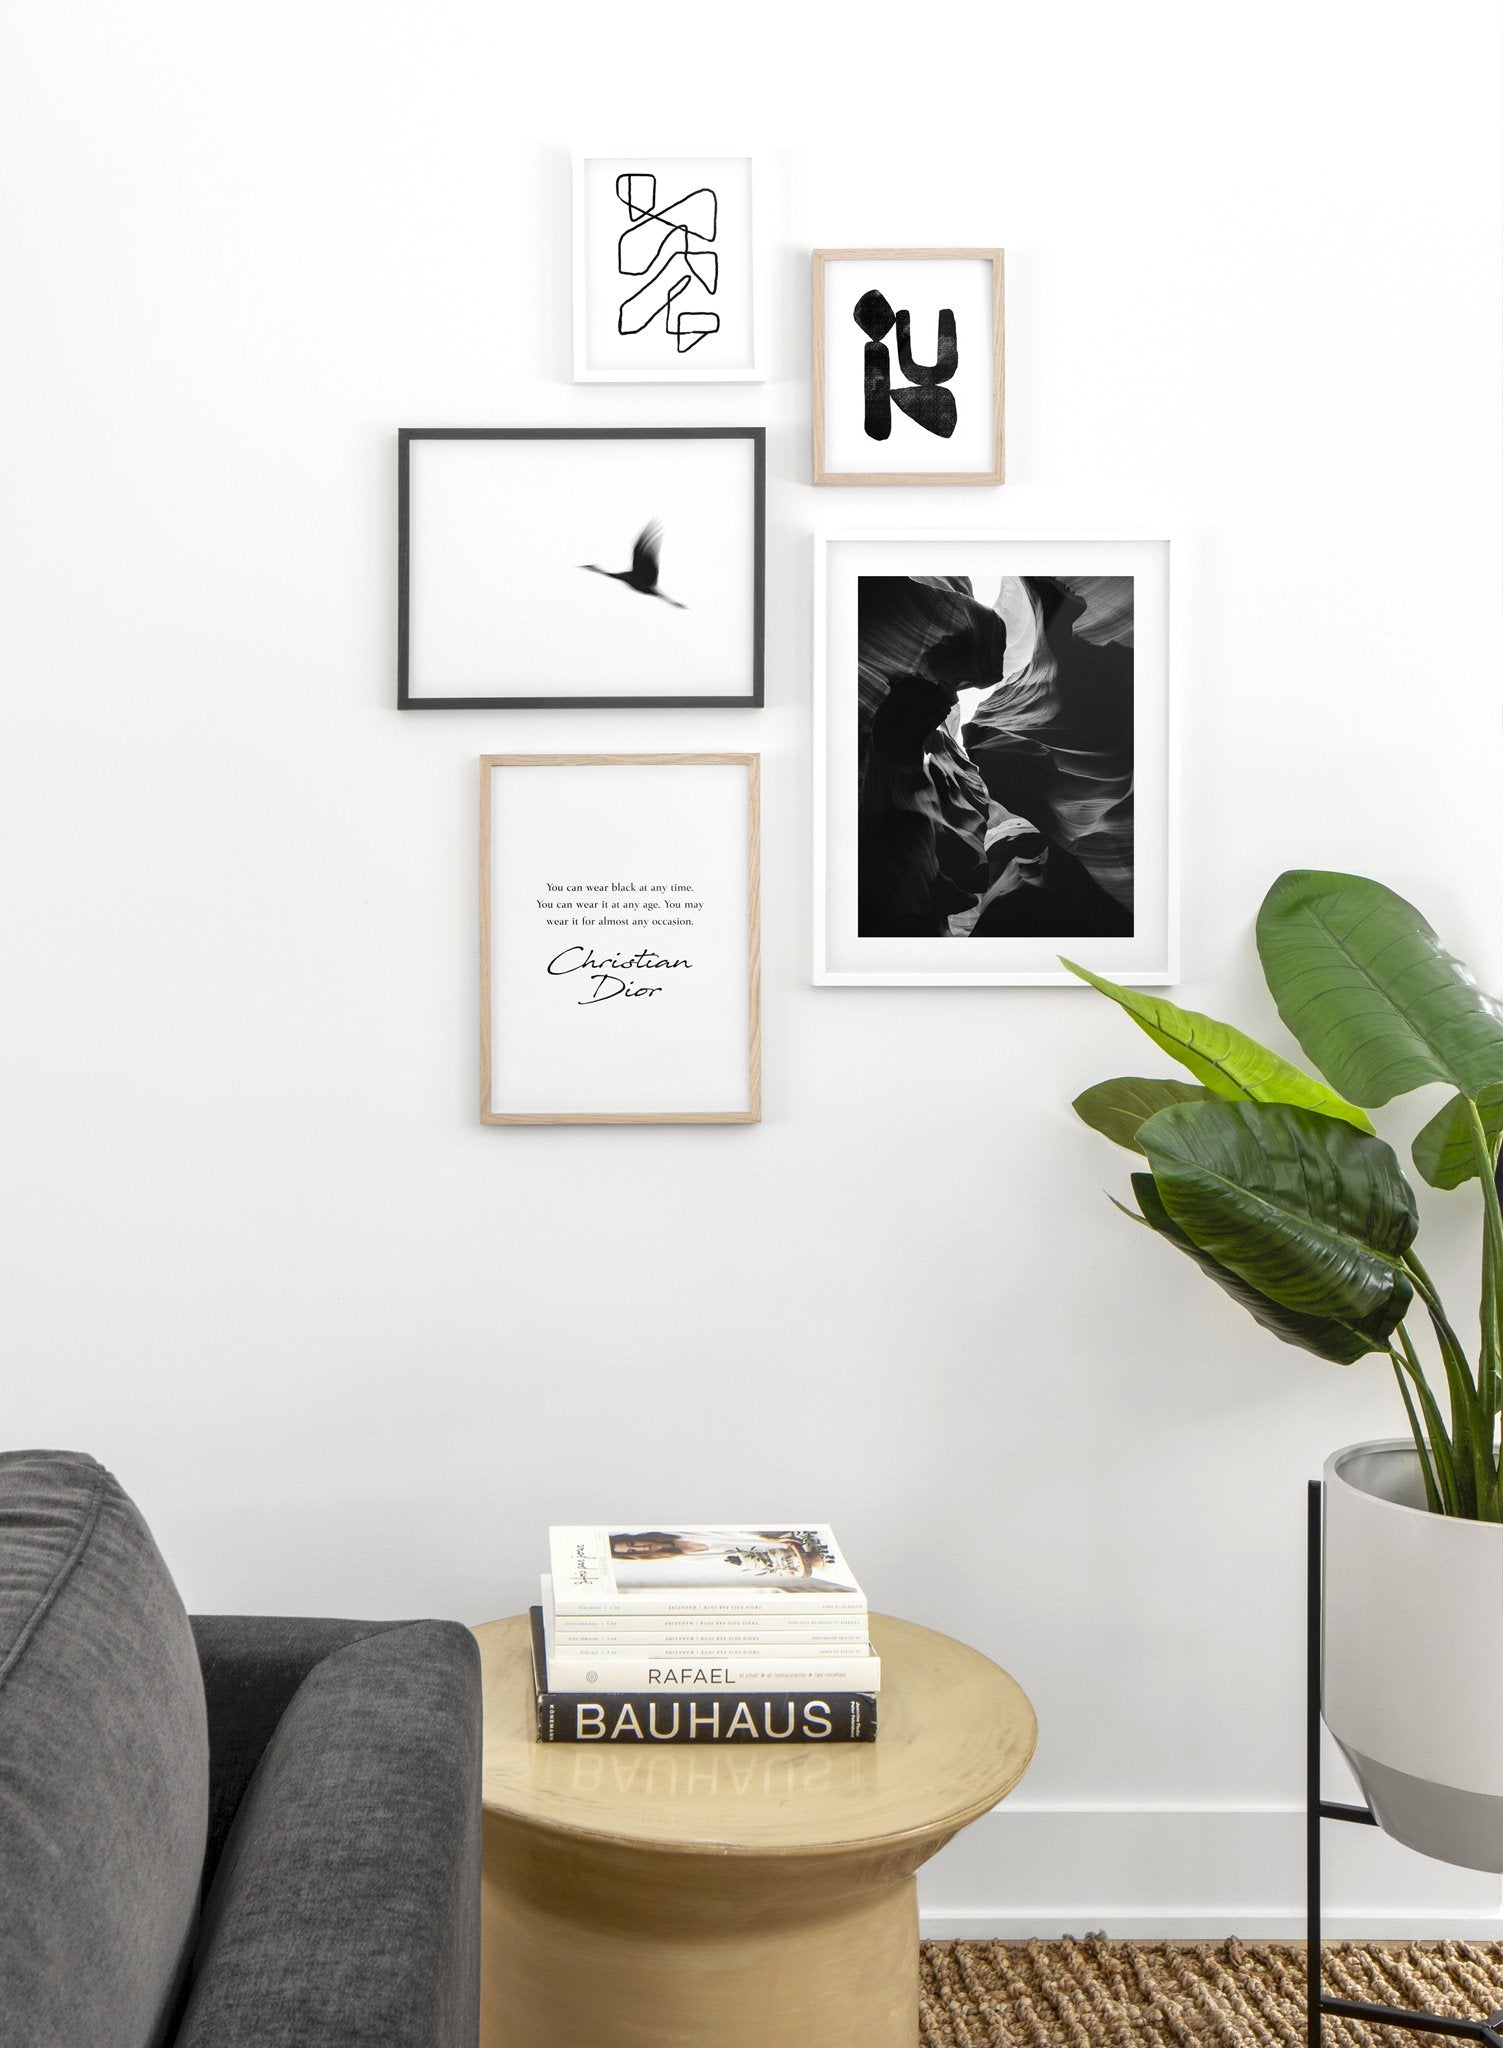 Modern minimalist photography by Opposite Wall with black and white photography of bird in flight - Lifestyle Gallery - Living Room